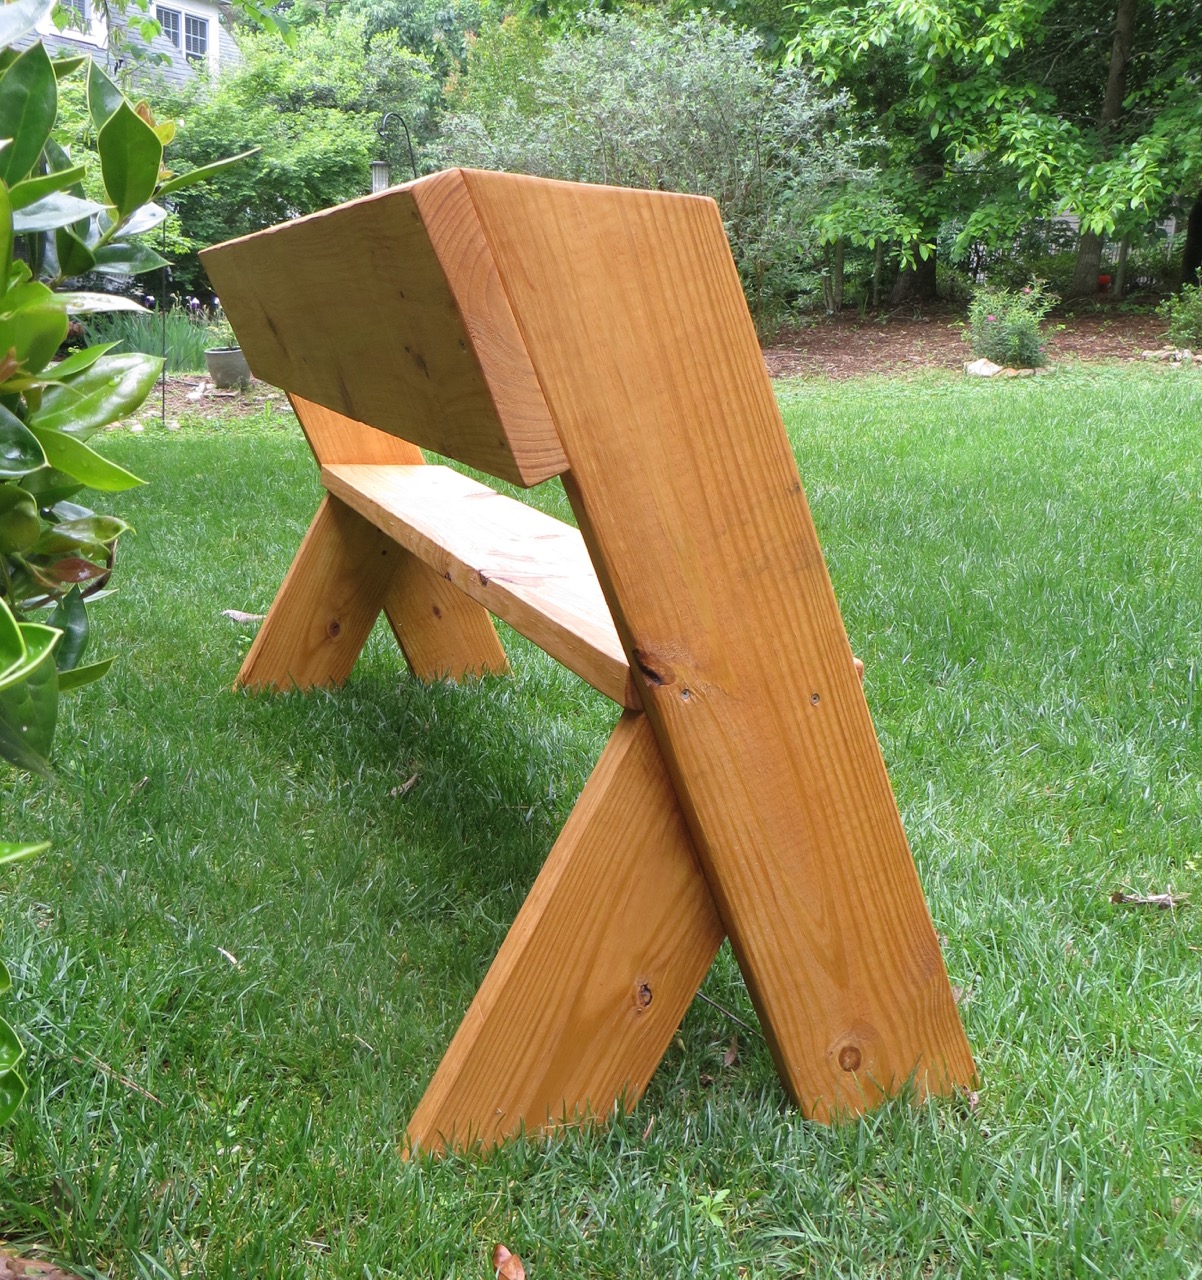 The Project Lady: DIY Tutorial - $16 Simple Outdoor Wood Bench